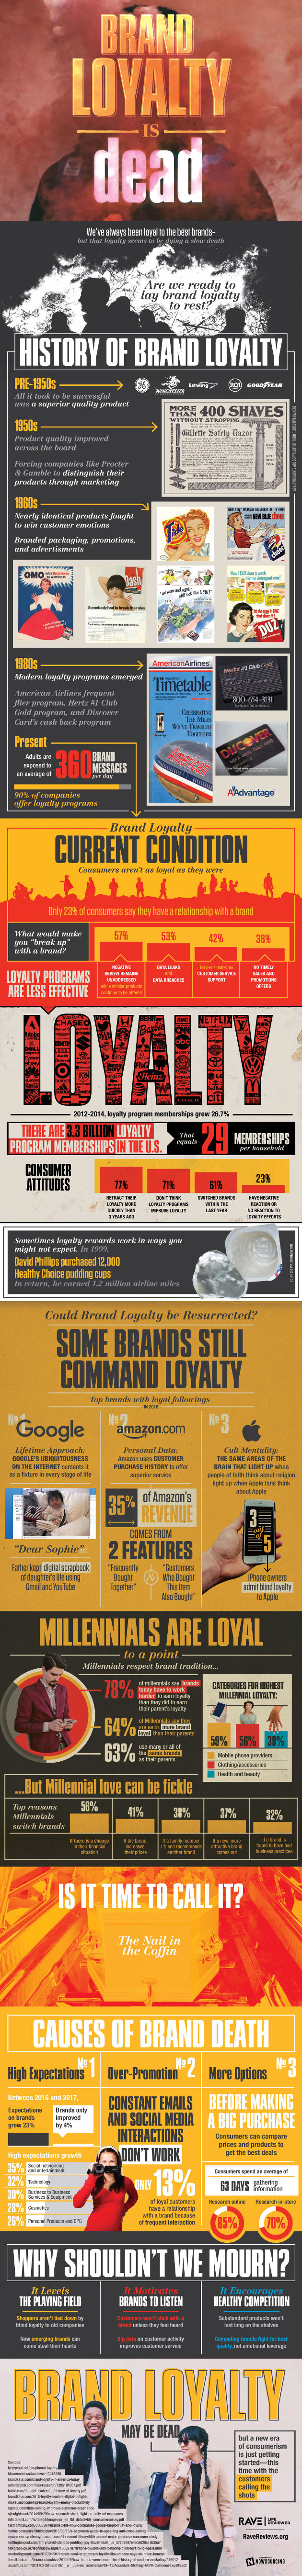 Brand Loyalty Today Is Dead? [Infographic]